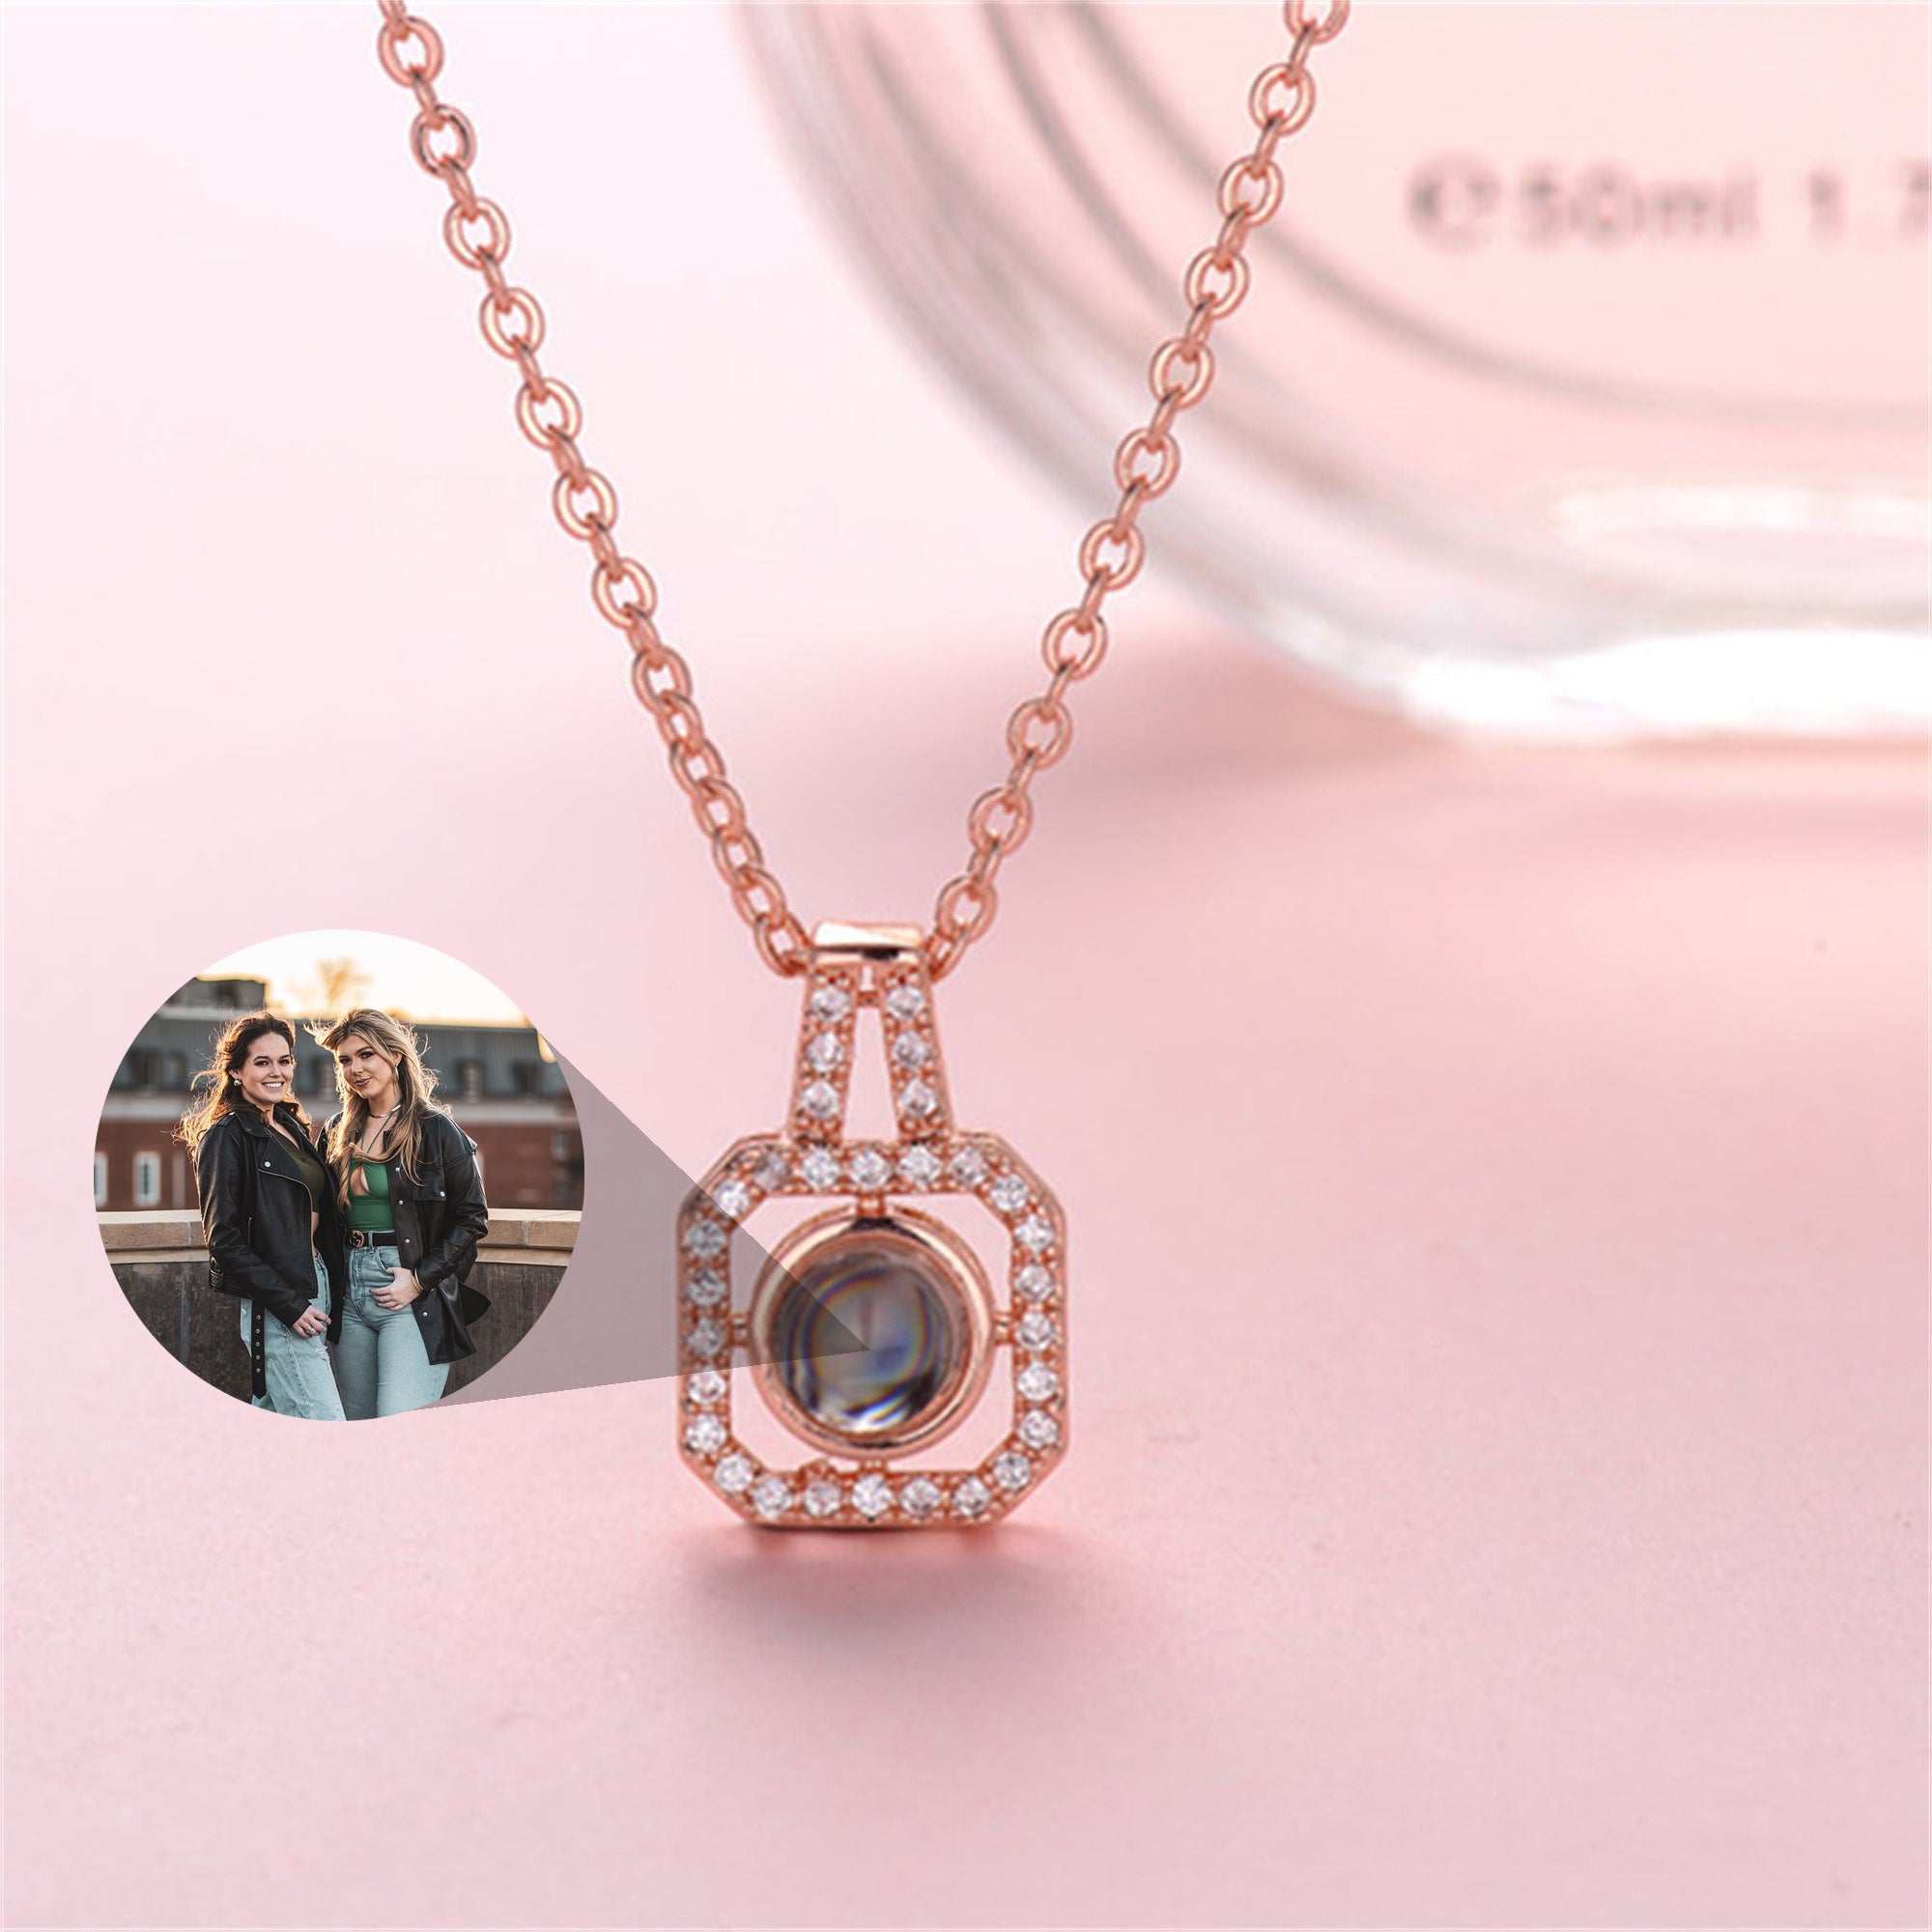 Personalized Square Projection Necklace, Custom Memorial Picture Pendant Jewelry